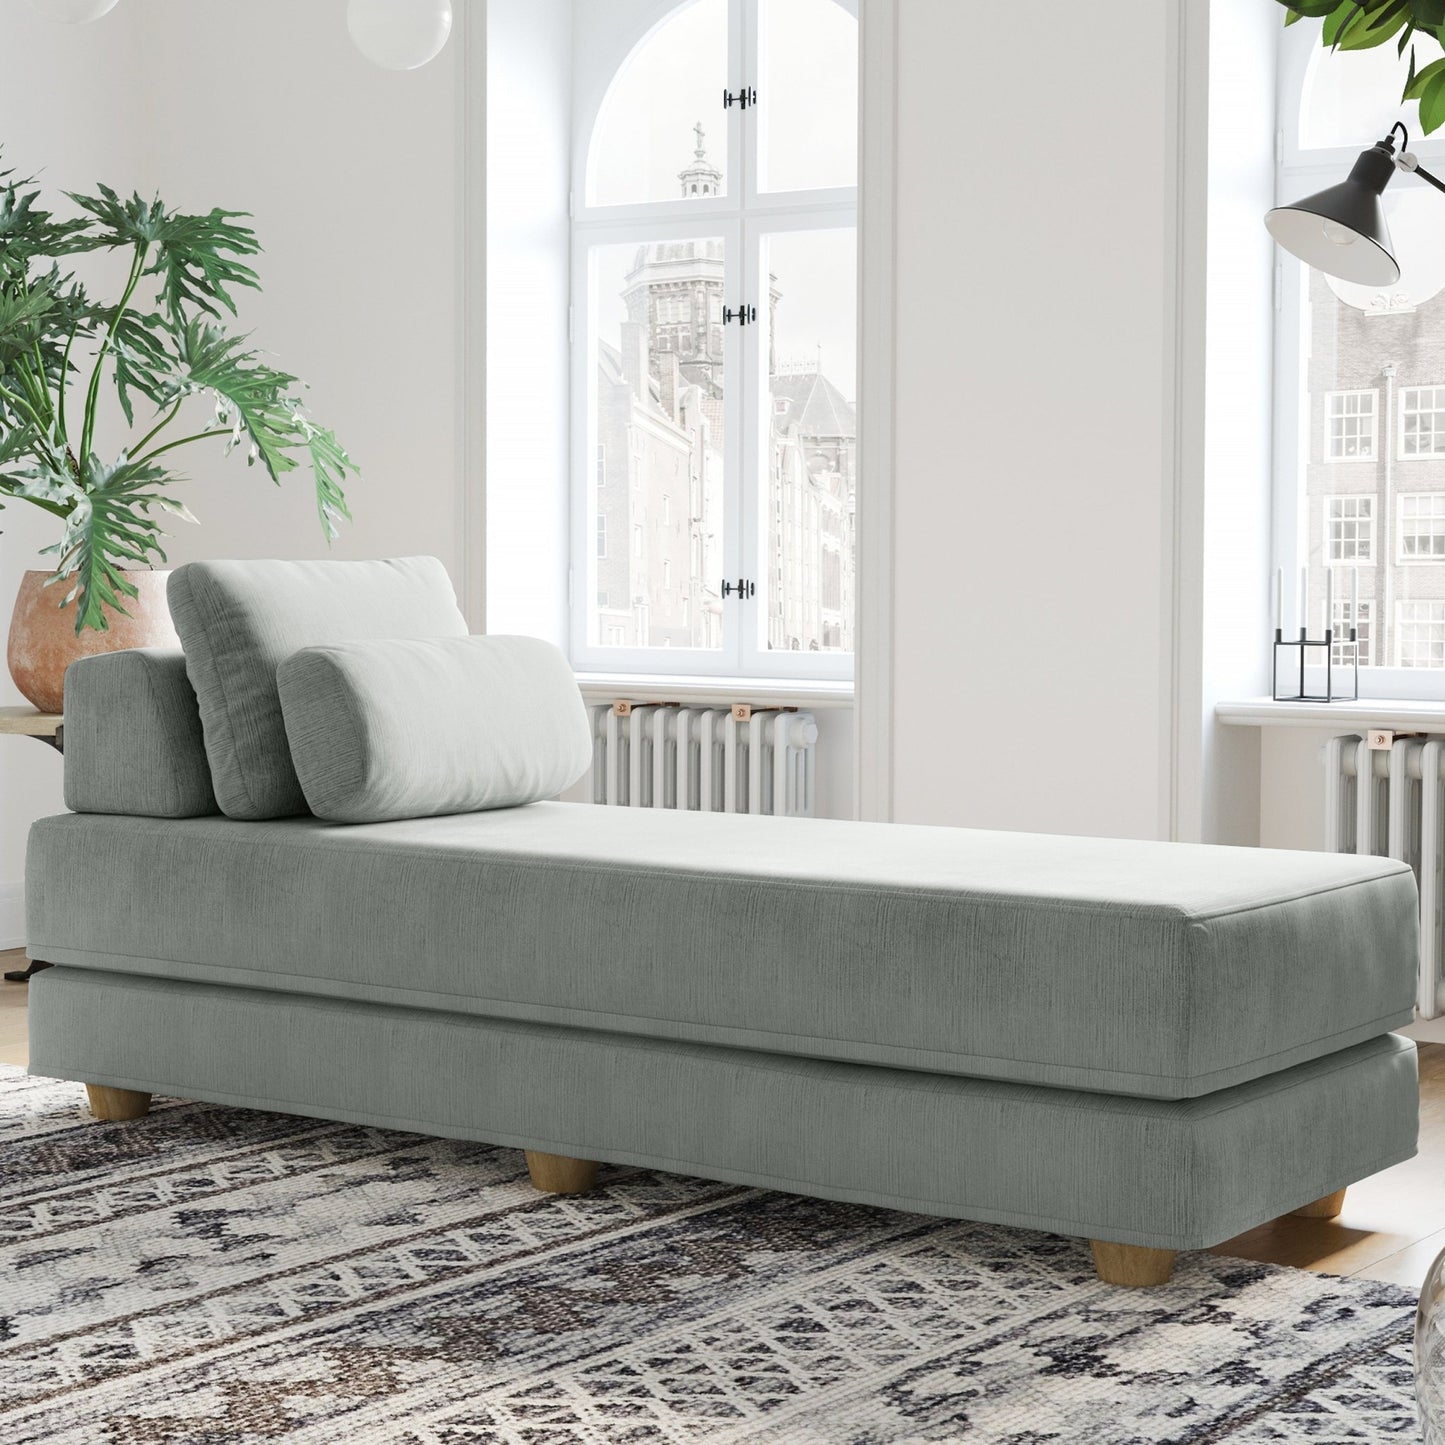 Jaxx Balshan Chaise Lounge Daybed (18962) - SchoolOutlet